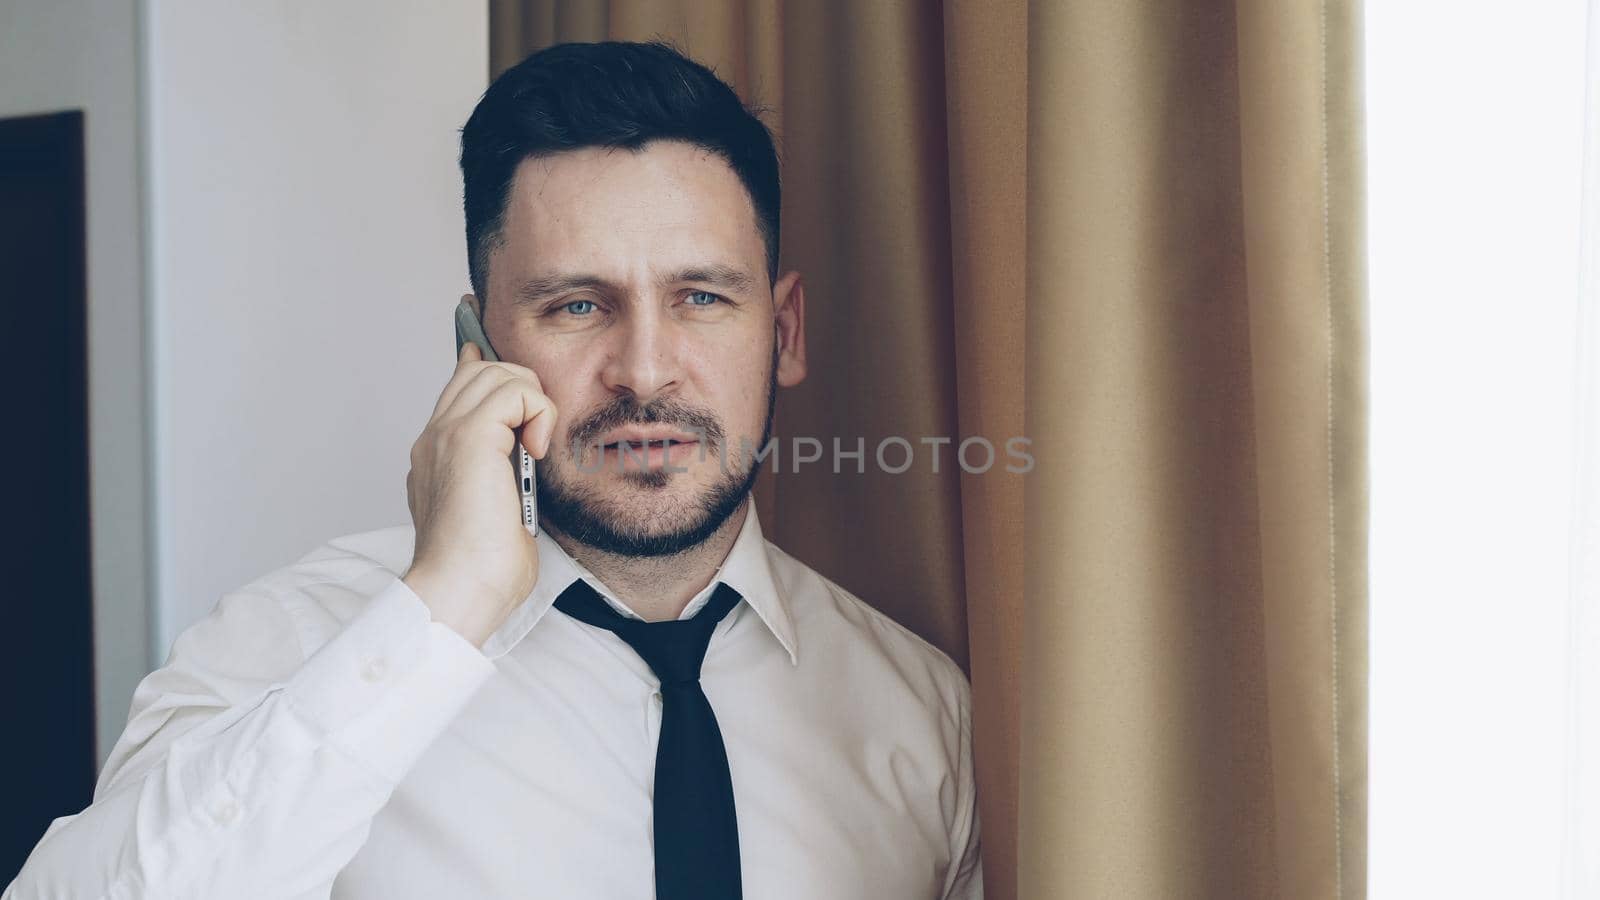 Confident bearded businessman in white shirt and tie talking on mobile phone standing near window in hotel room